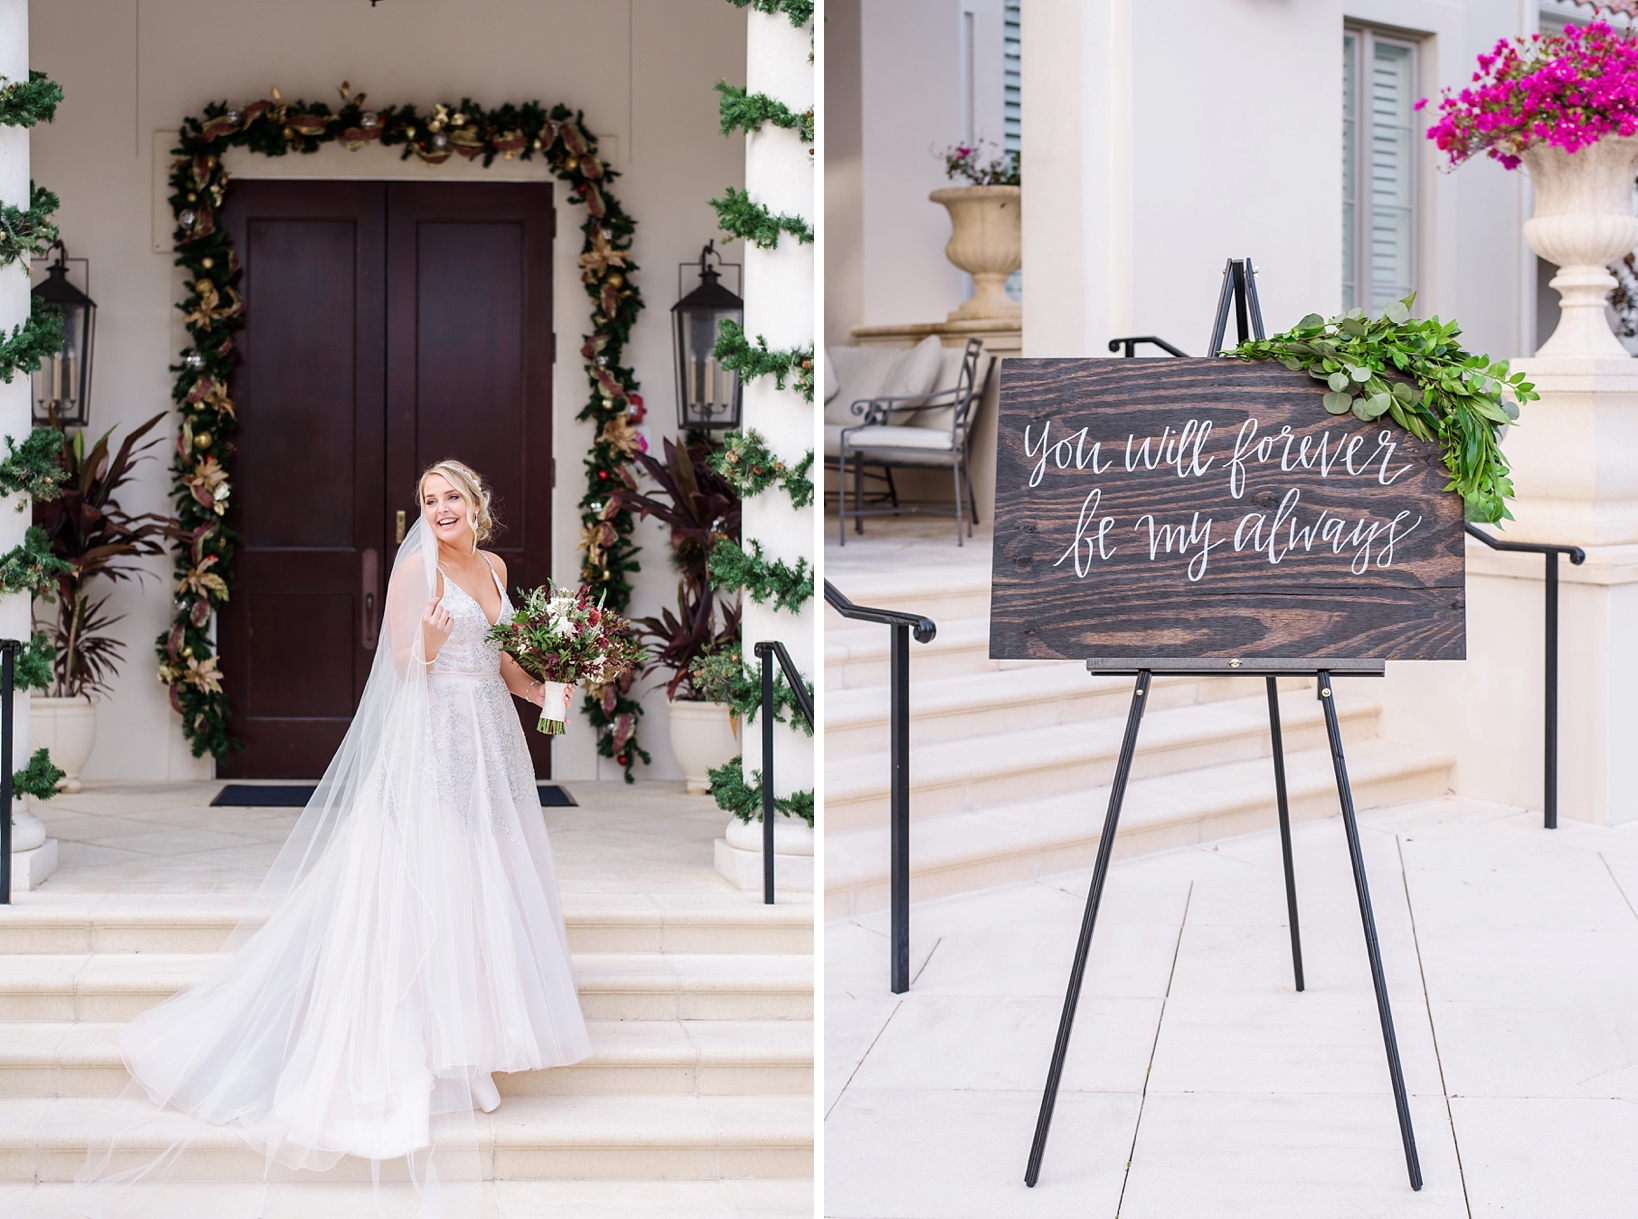 The bride wearing her Hayley Paige Wedding dress and a handwritten cursive sign with a quote